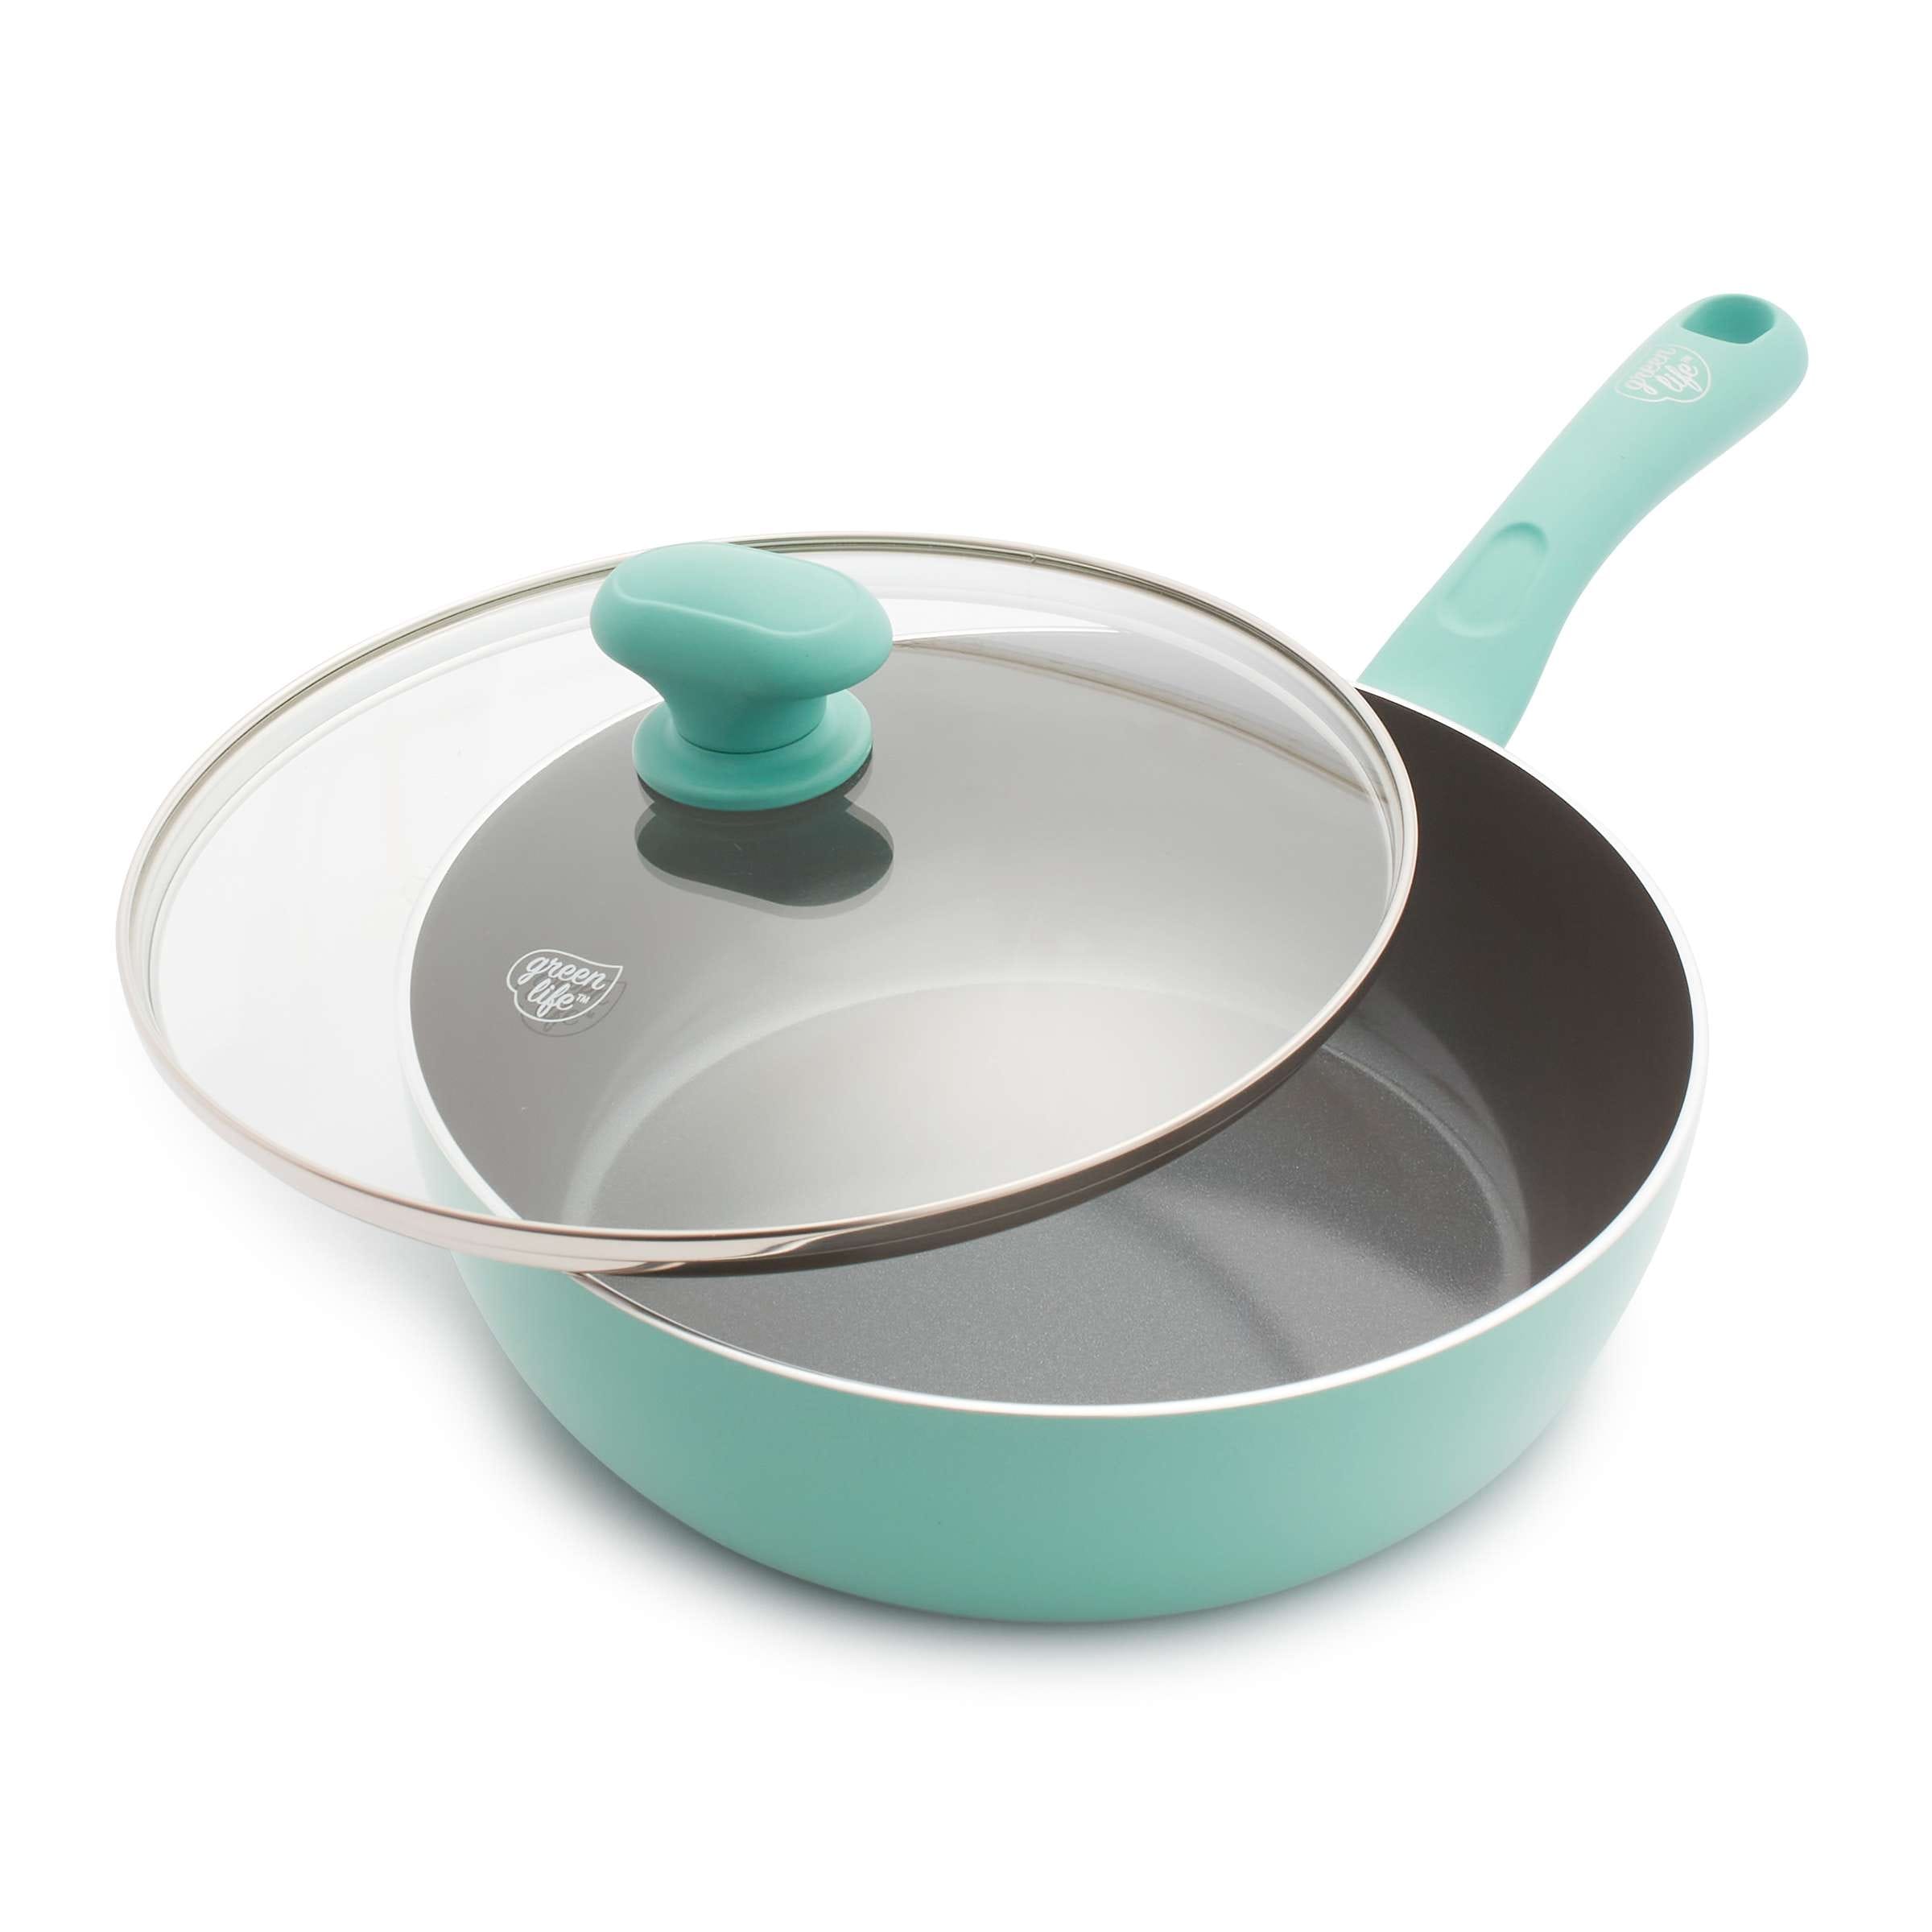 GreenLife Healthy Ceramic Nonstick Stainless Steel Pro 11 Frypan